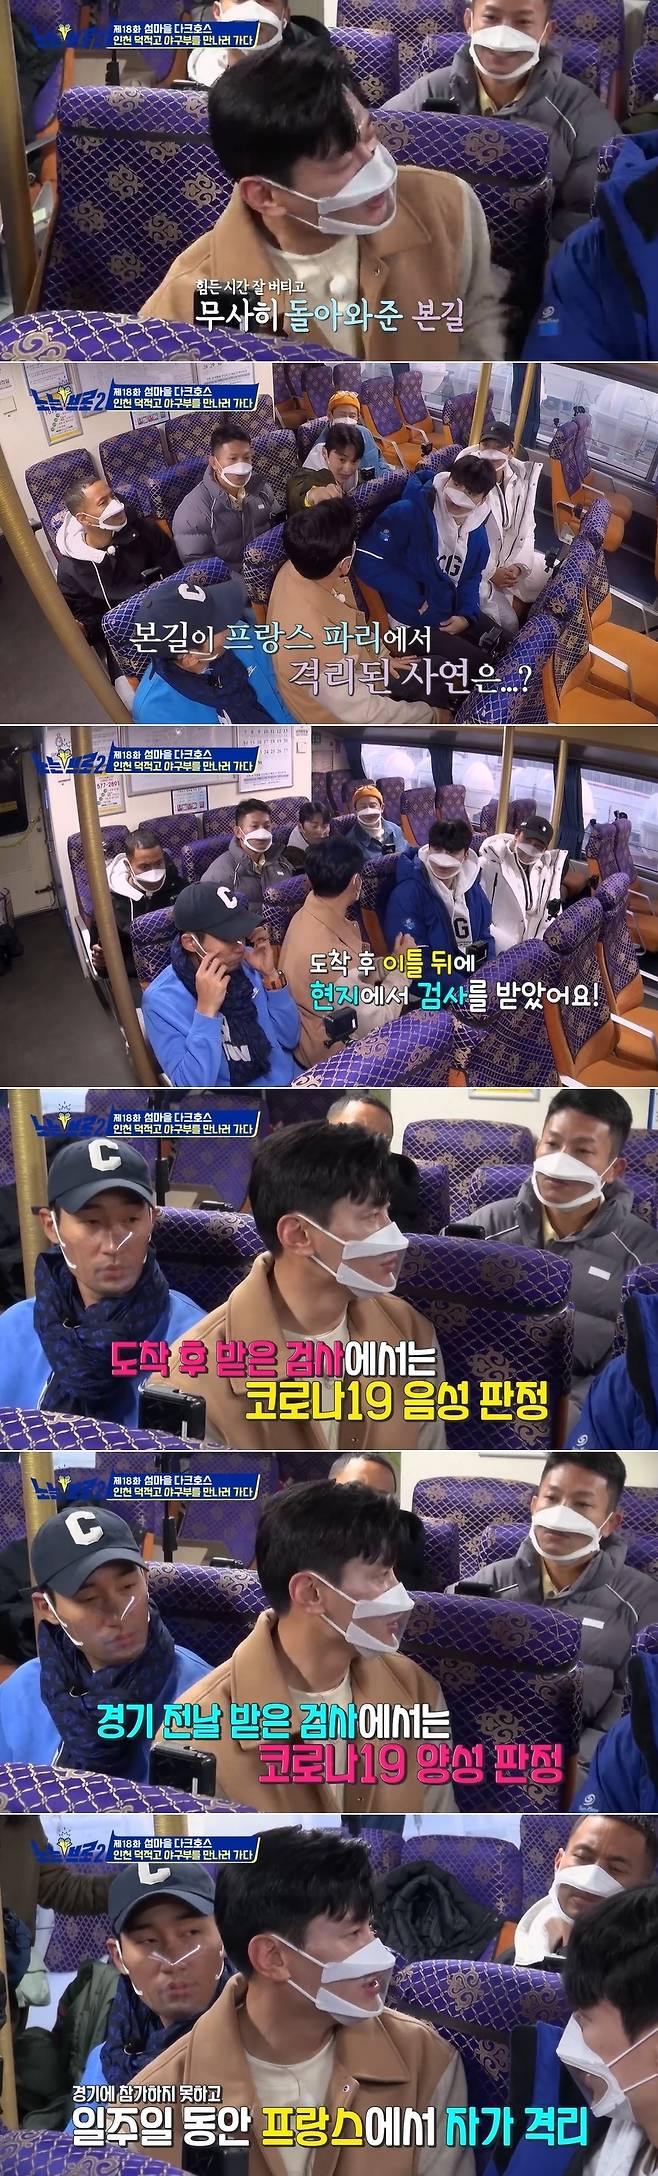 Fencing player Gu Bon-gil returned to No Bro 2 after Corona 19 cured.On December 20th, the Ticast E channel No-Bro 2 showed the brood presents a very special time to the island village baseball team, which was a crisis of closing, along with the sun of LG Twins Yu Kang Nam, Lim Chan Kyu,Gu Bon-gil, who was away from the Paris tournament in the opening day, added a welcome addition.Gu Bon-gil was also worried about many people after being confirmed by Corona 19 at Paris.Gu Bon-gil said, Gu Bon-gil came back from Paris alive. Gu Bon-gil said, Thanks to my brothers, I came back healthy. I was worried too much.